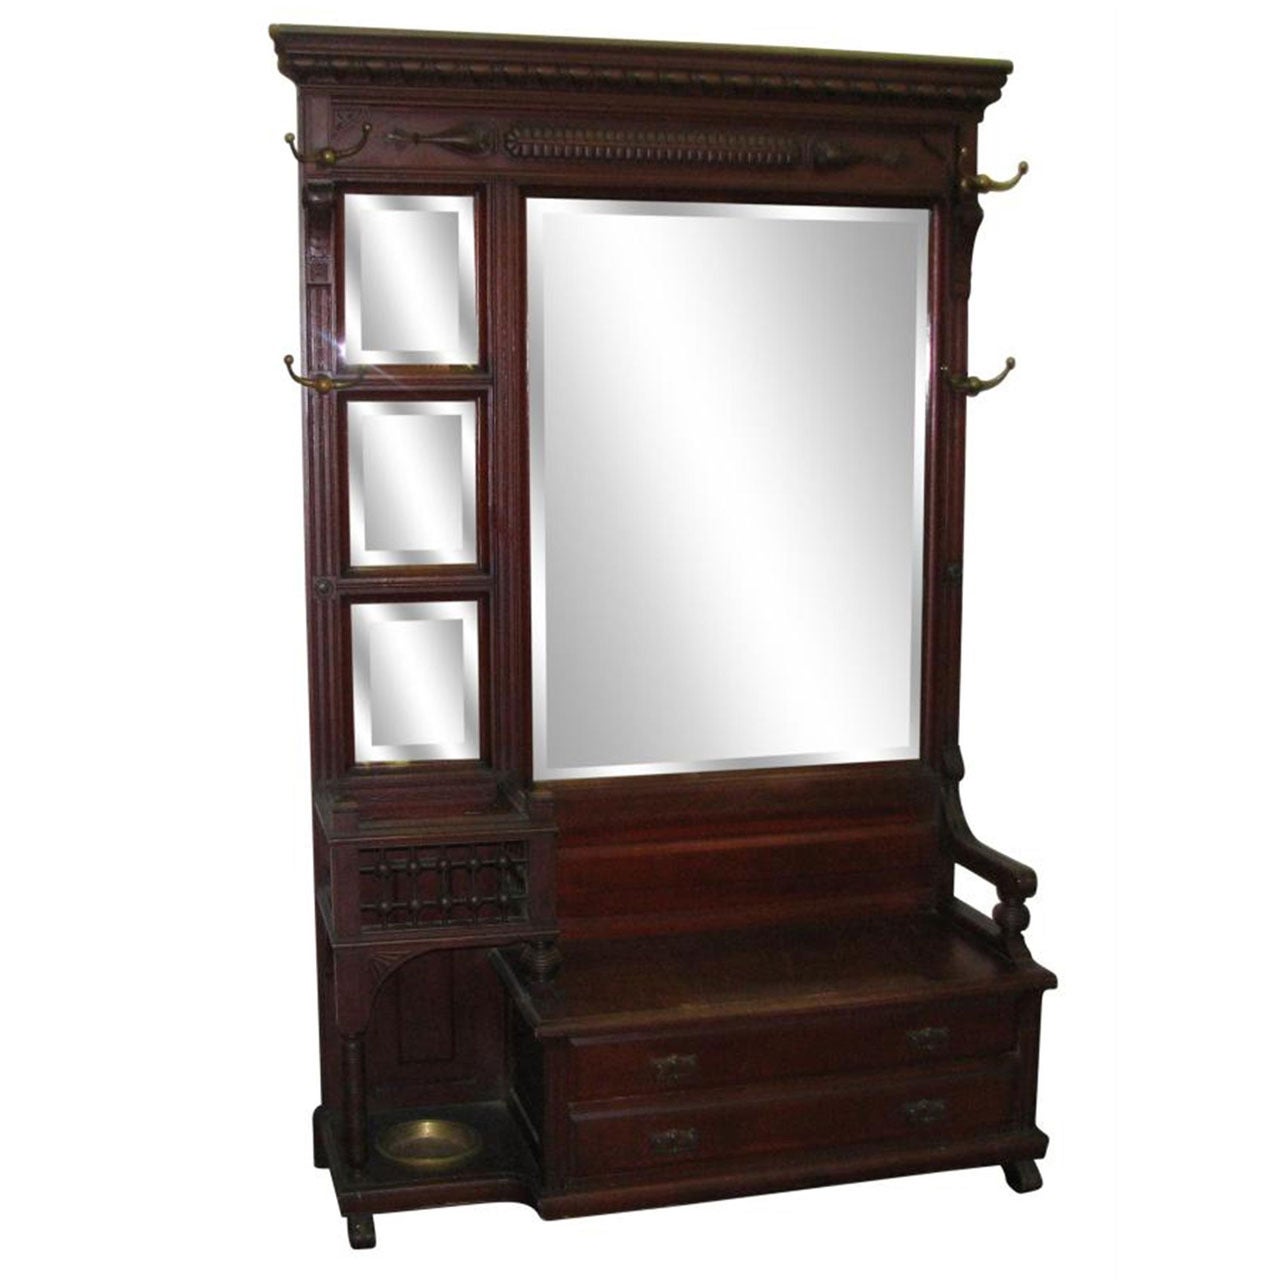 Late 1800s Beveled Pier Mirror with Coat Hooks and Umbrella Stand